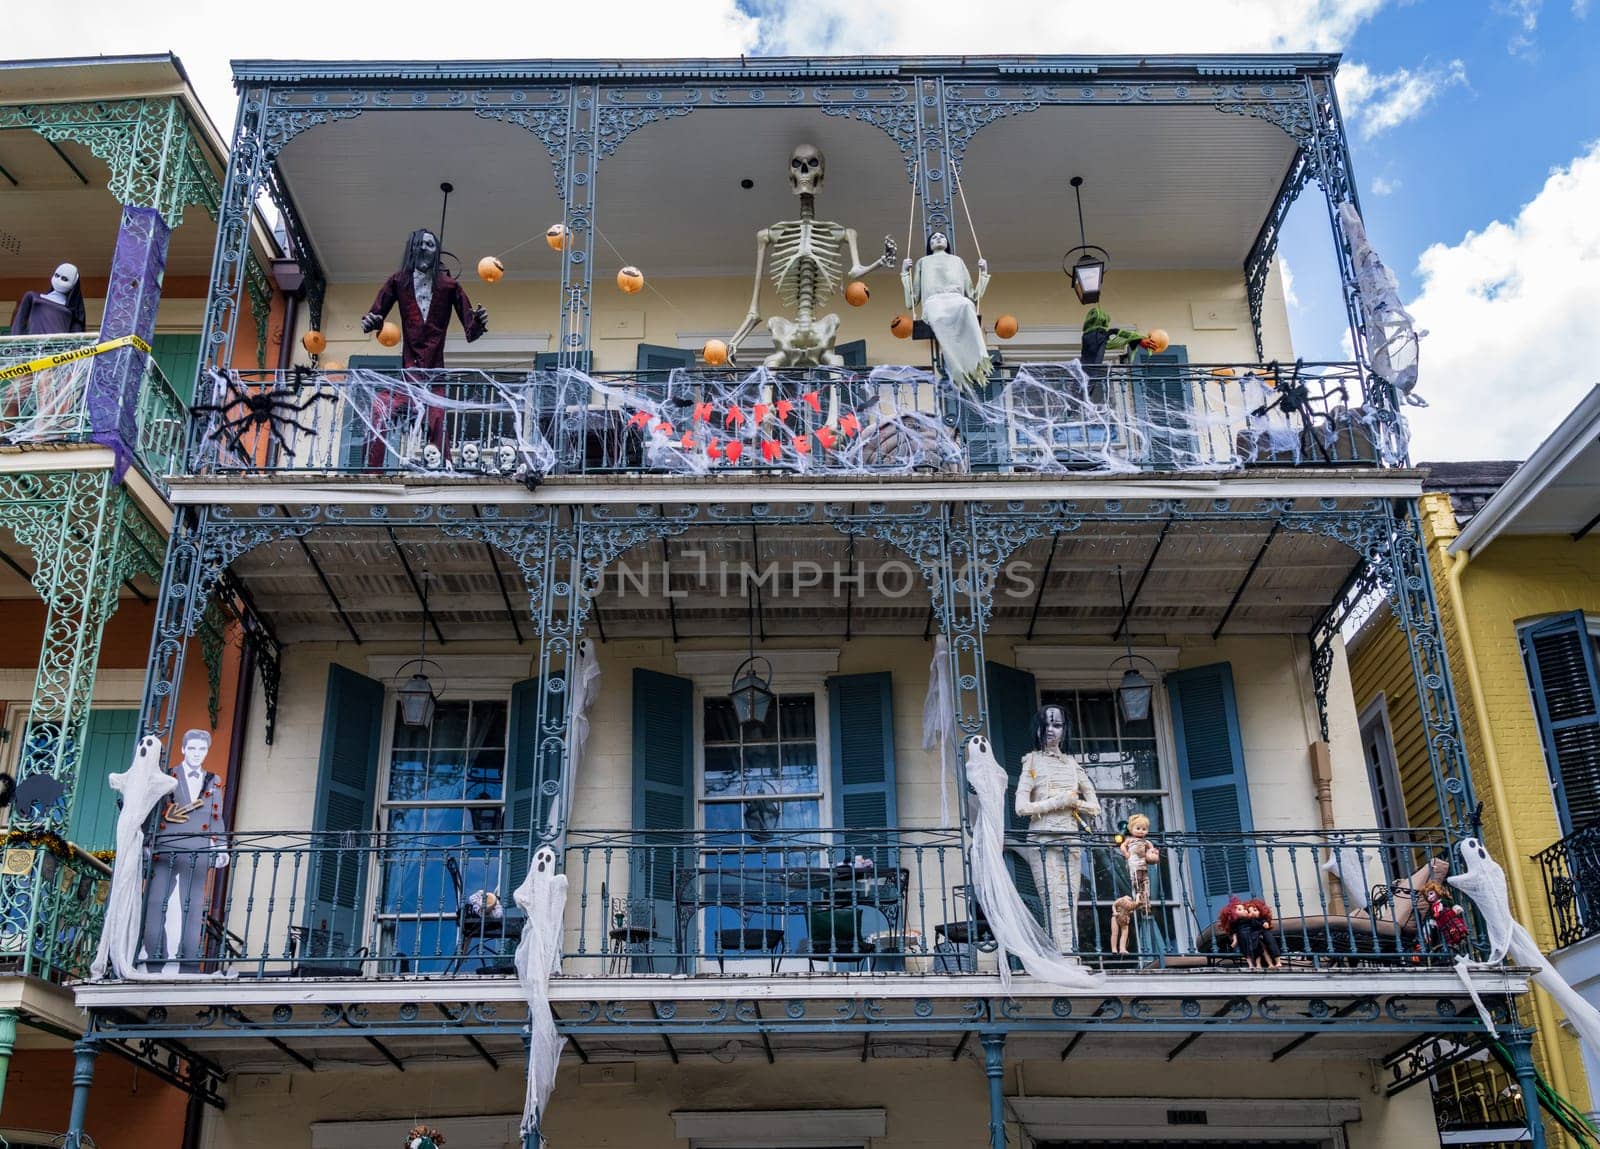 Halloween decorations on wrought iron balcony on New Orleans house by steheap